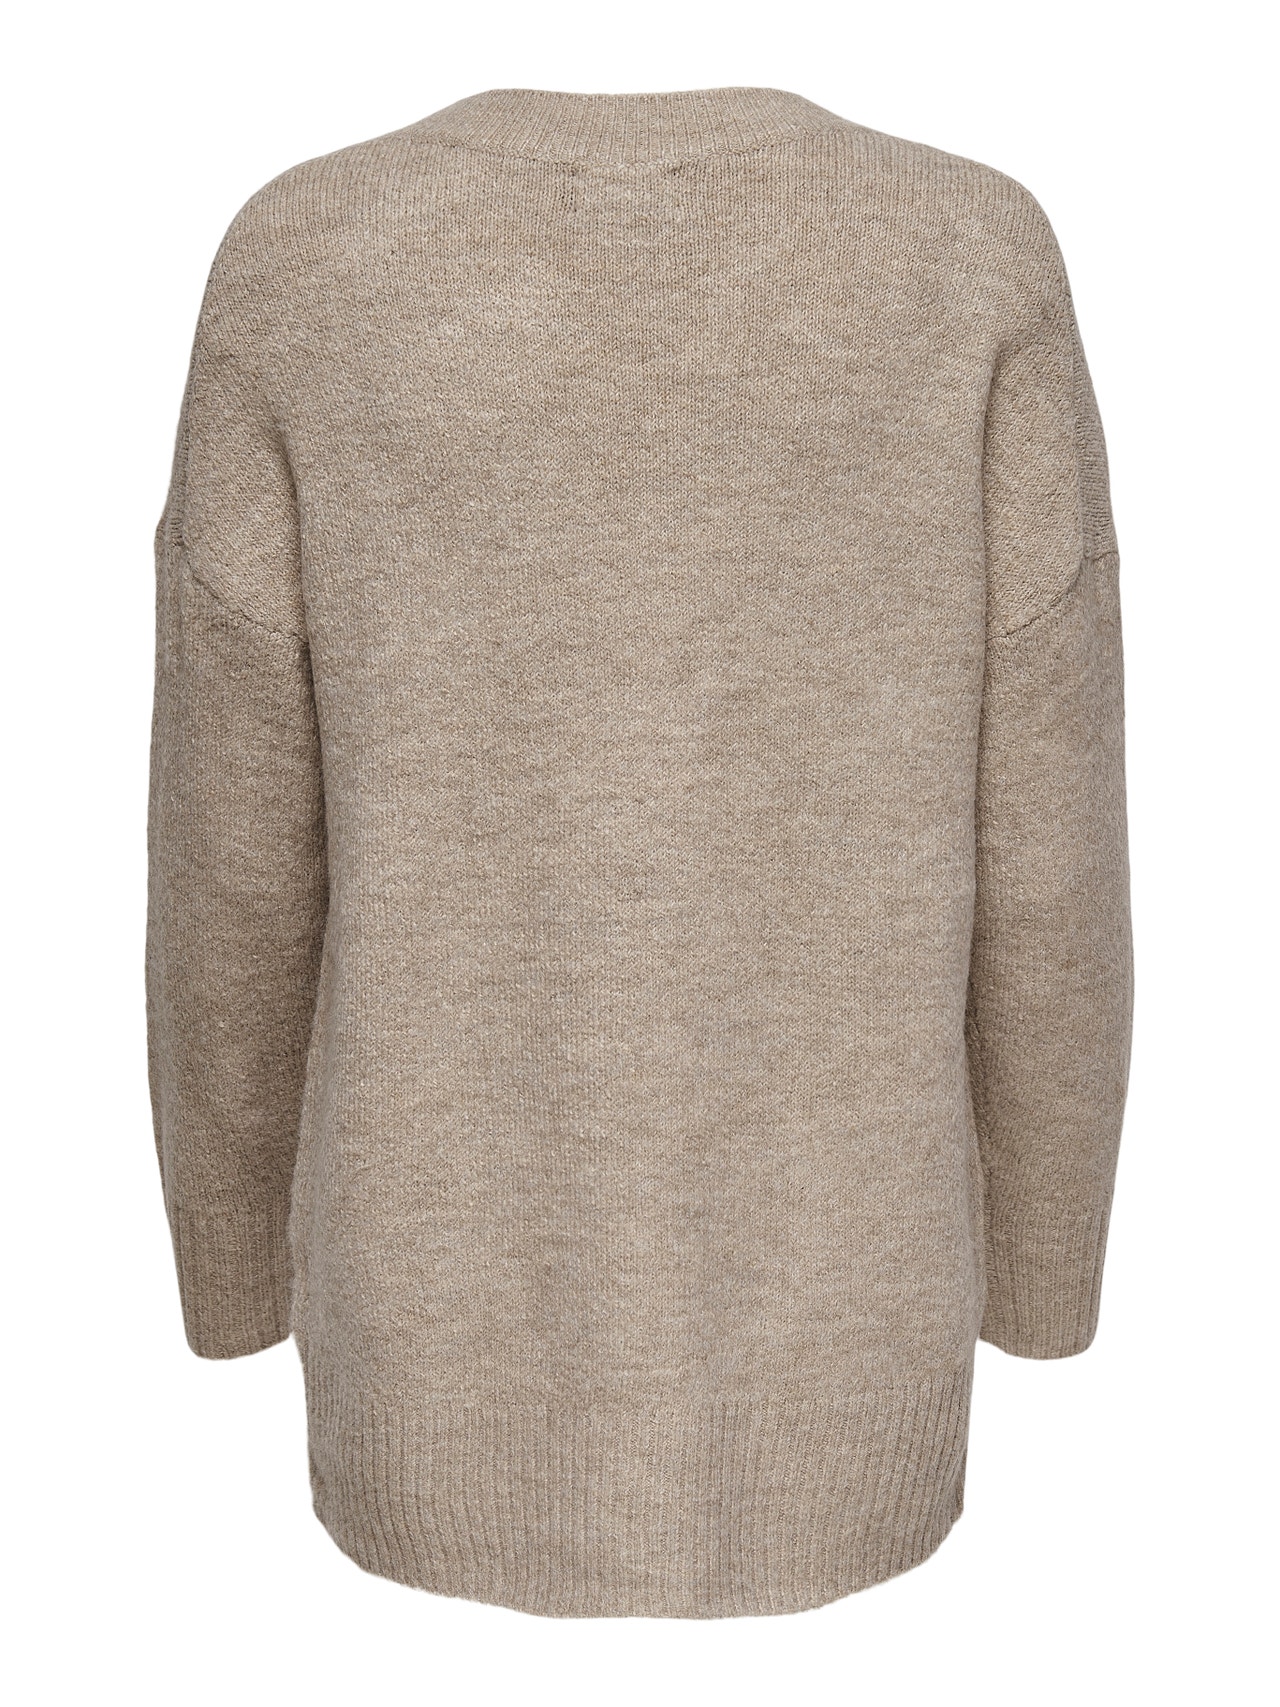 ONLY O-neck knitted pullover -Nomad - 15173800